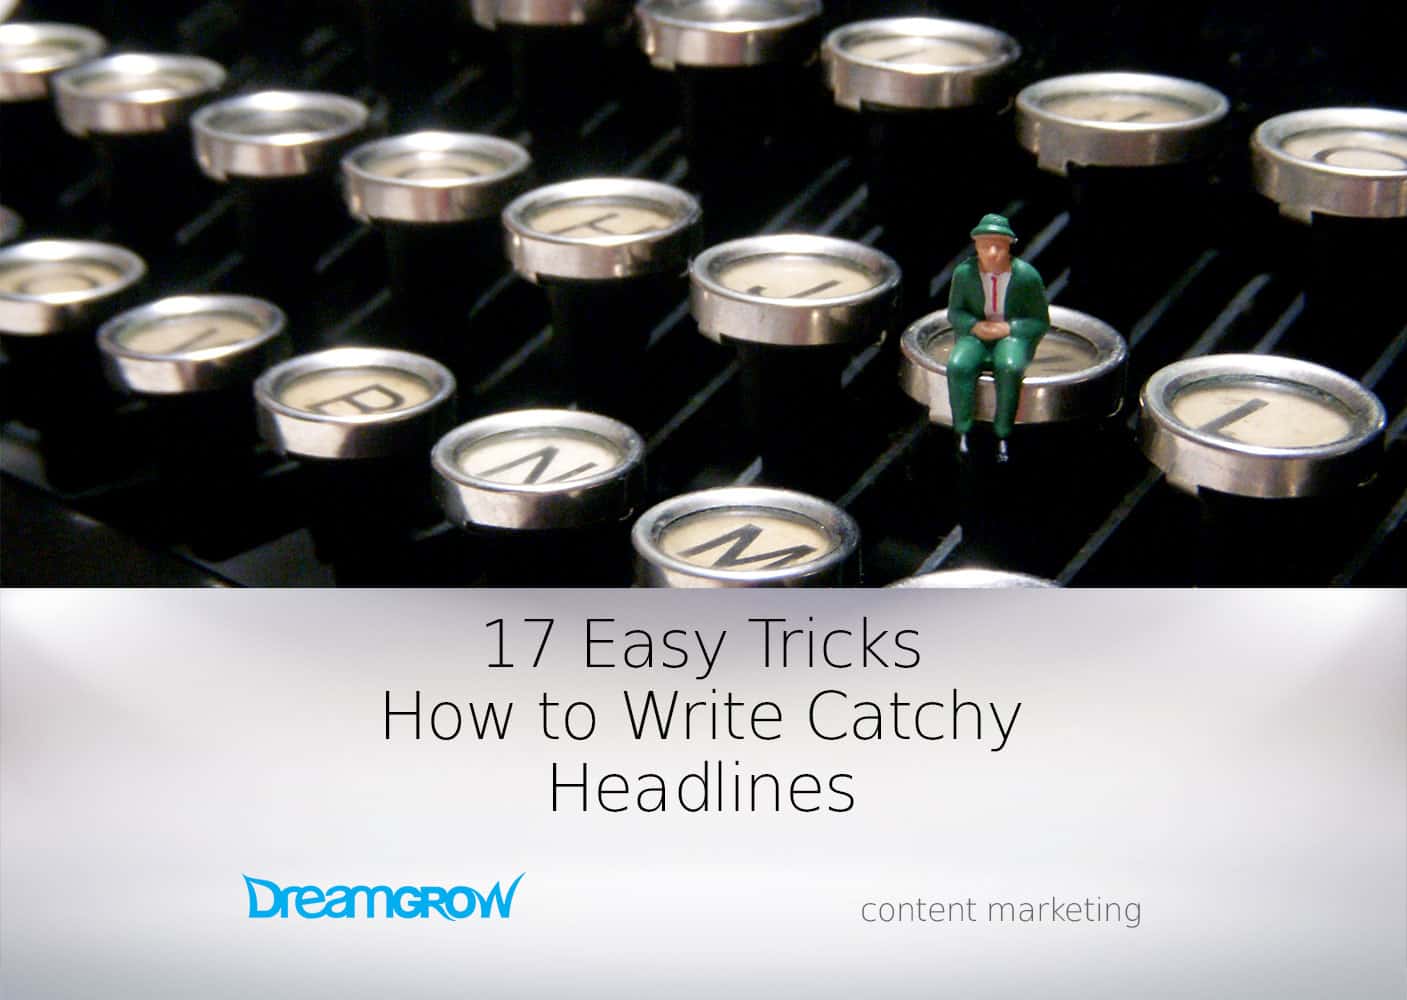 17 Easy Tricks How to Write Catchy Titles and Headlines